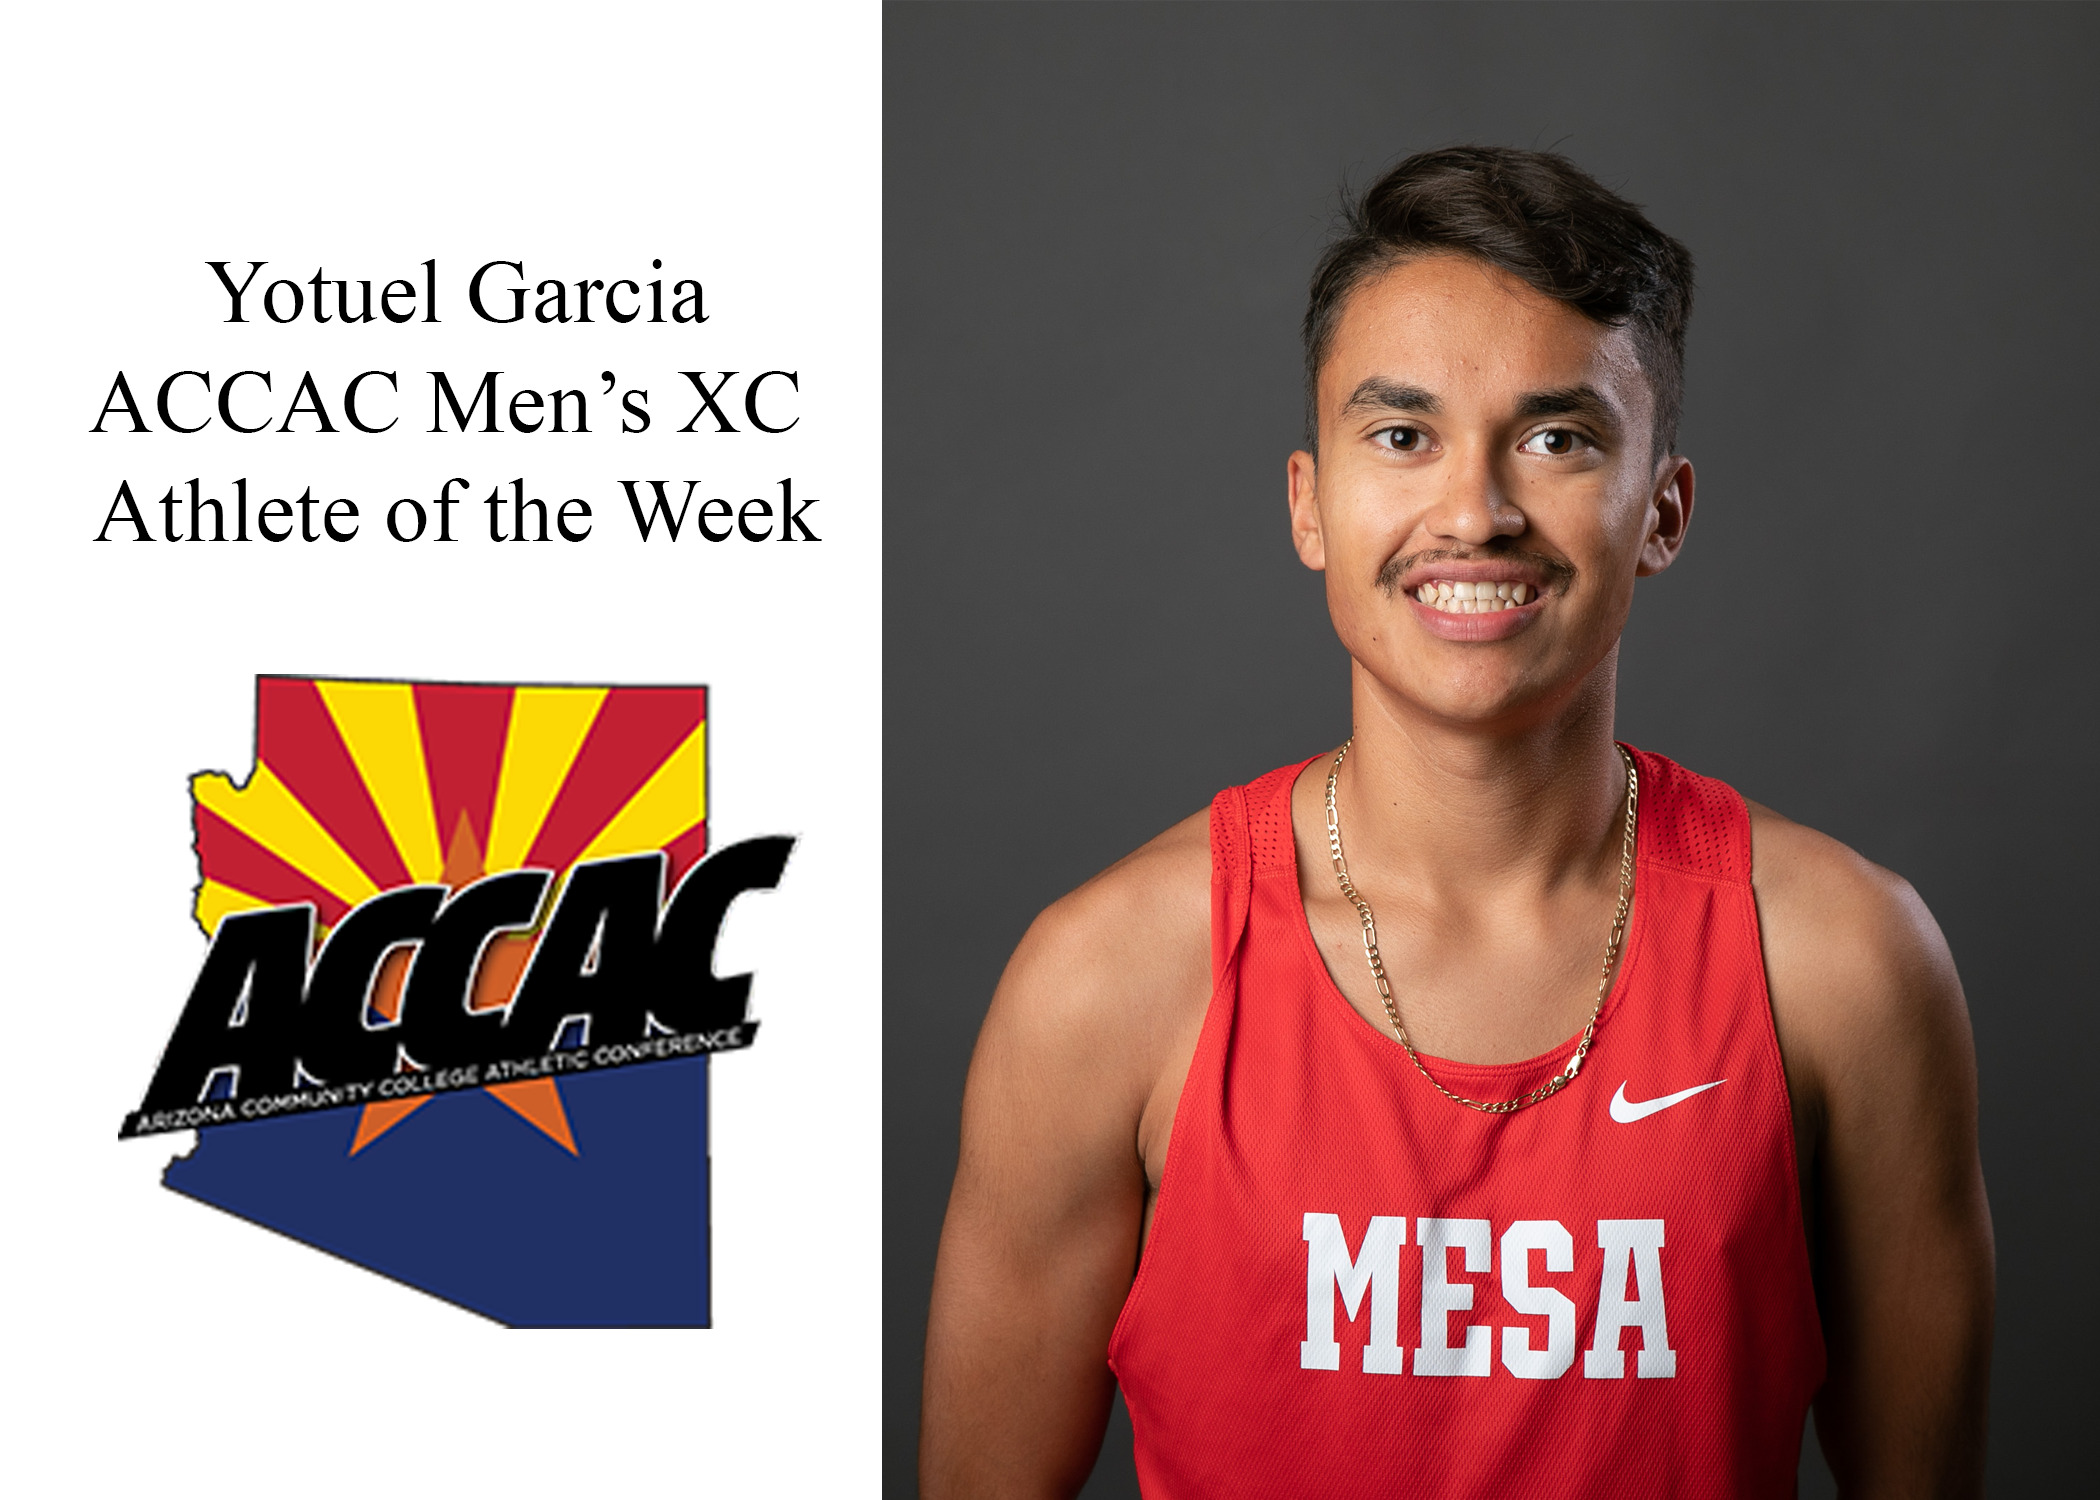 Yotuel Garcia Named ACCAC Men's XC Athlete of the Week